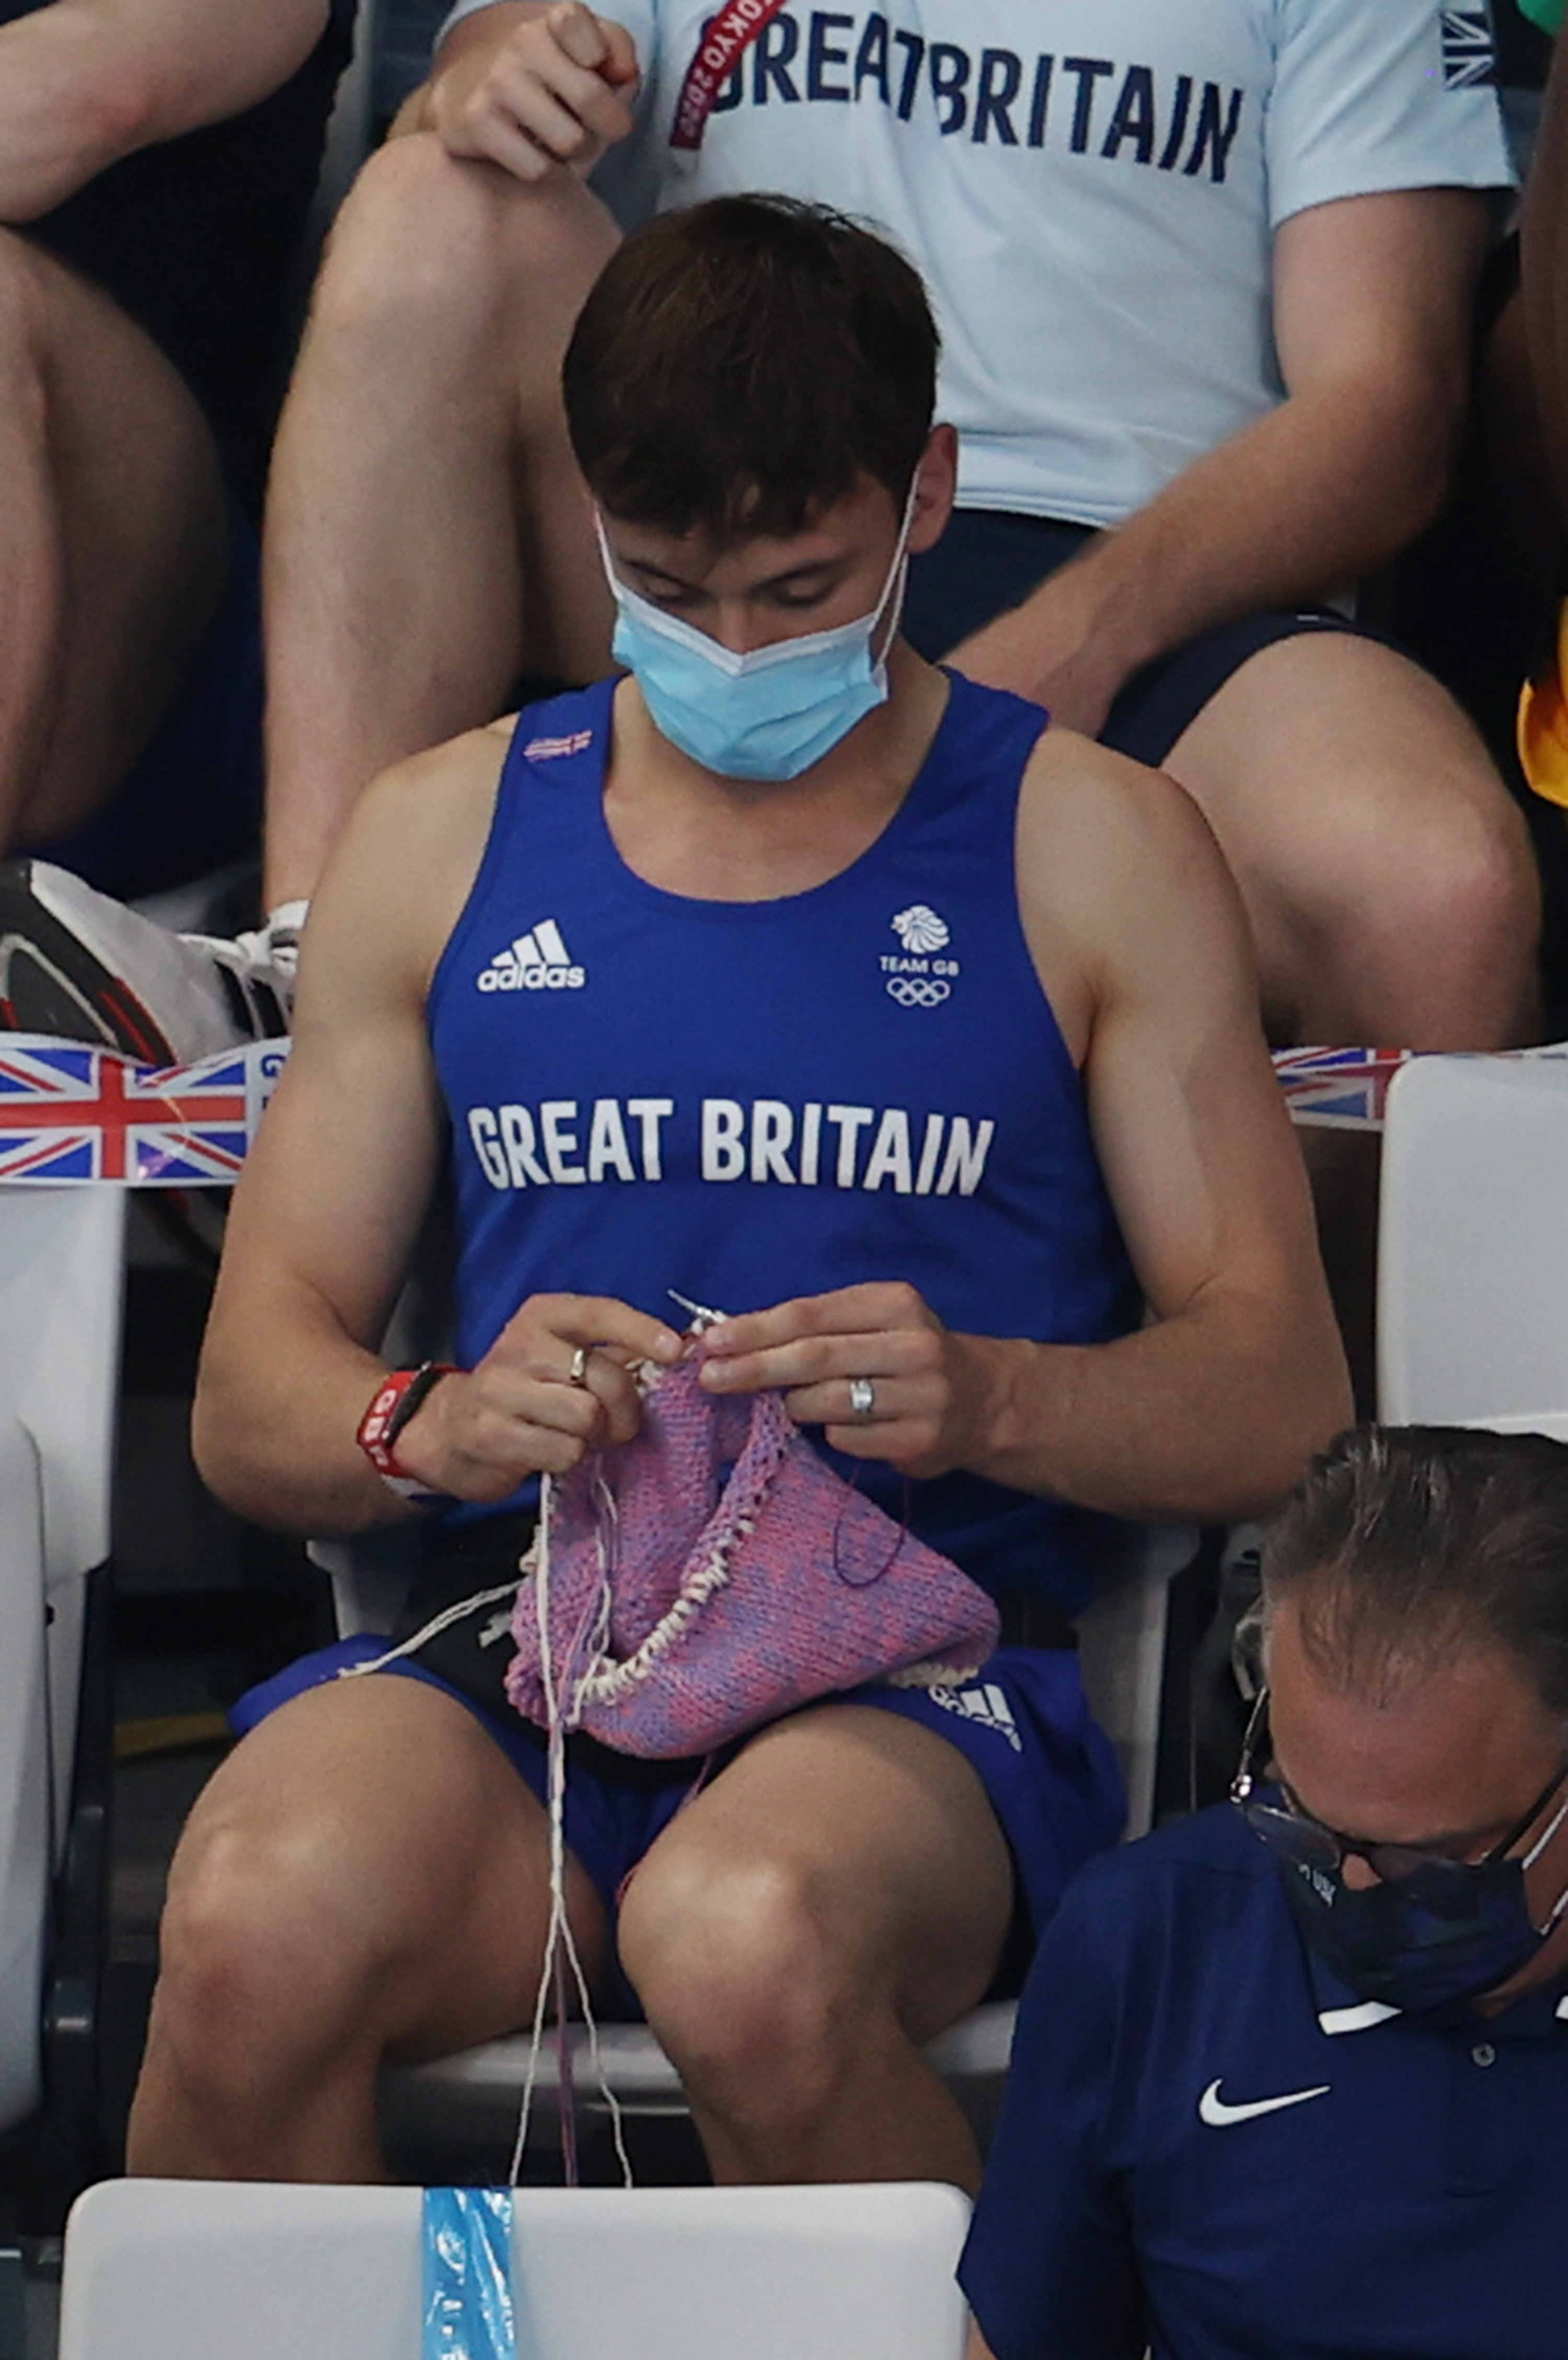 Tom Daley of Great Britain knitting in the stands during women's Olympics springboard final